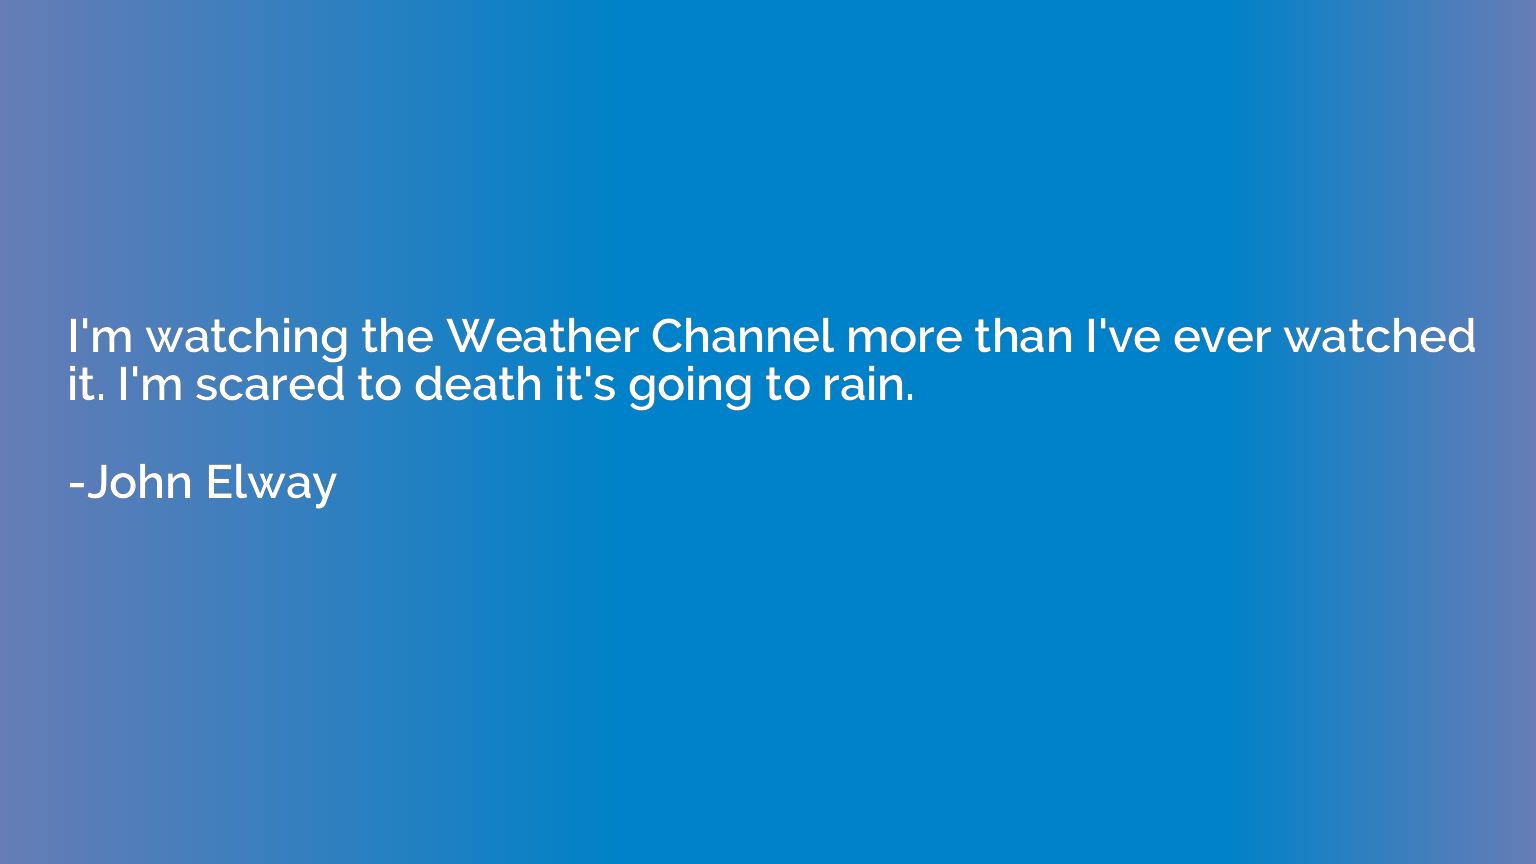 I'm watching the Weather Channel more than I've ever watched